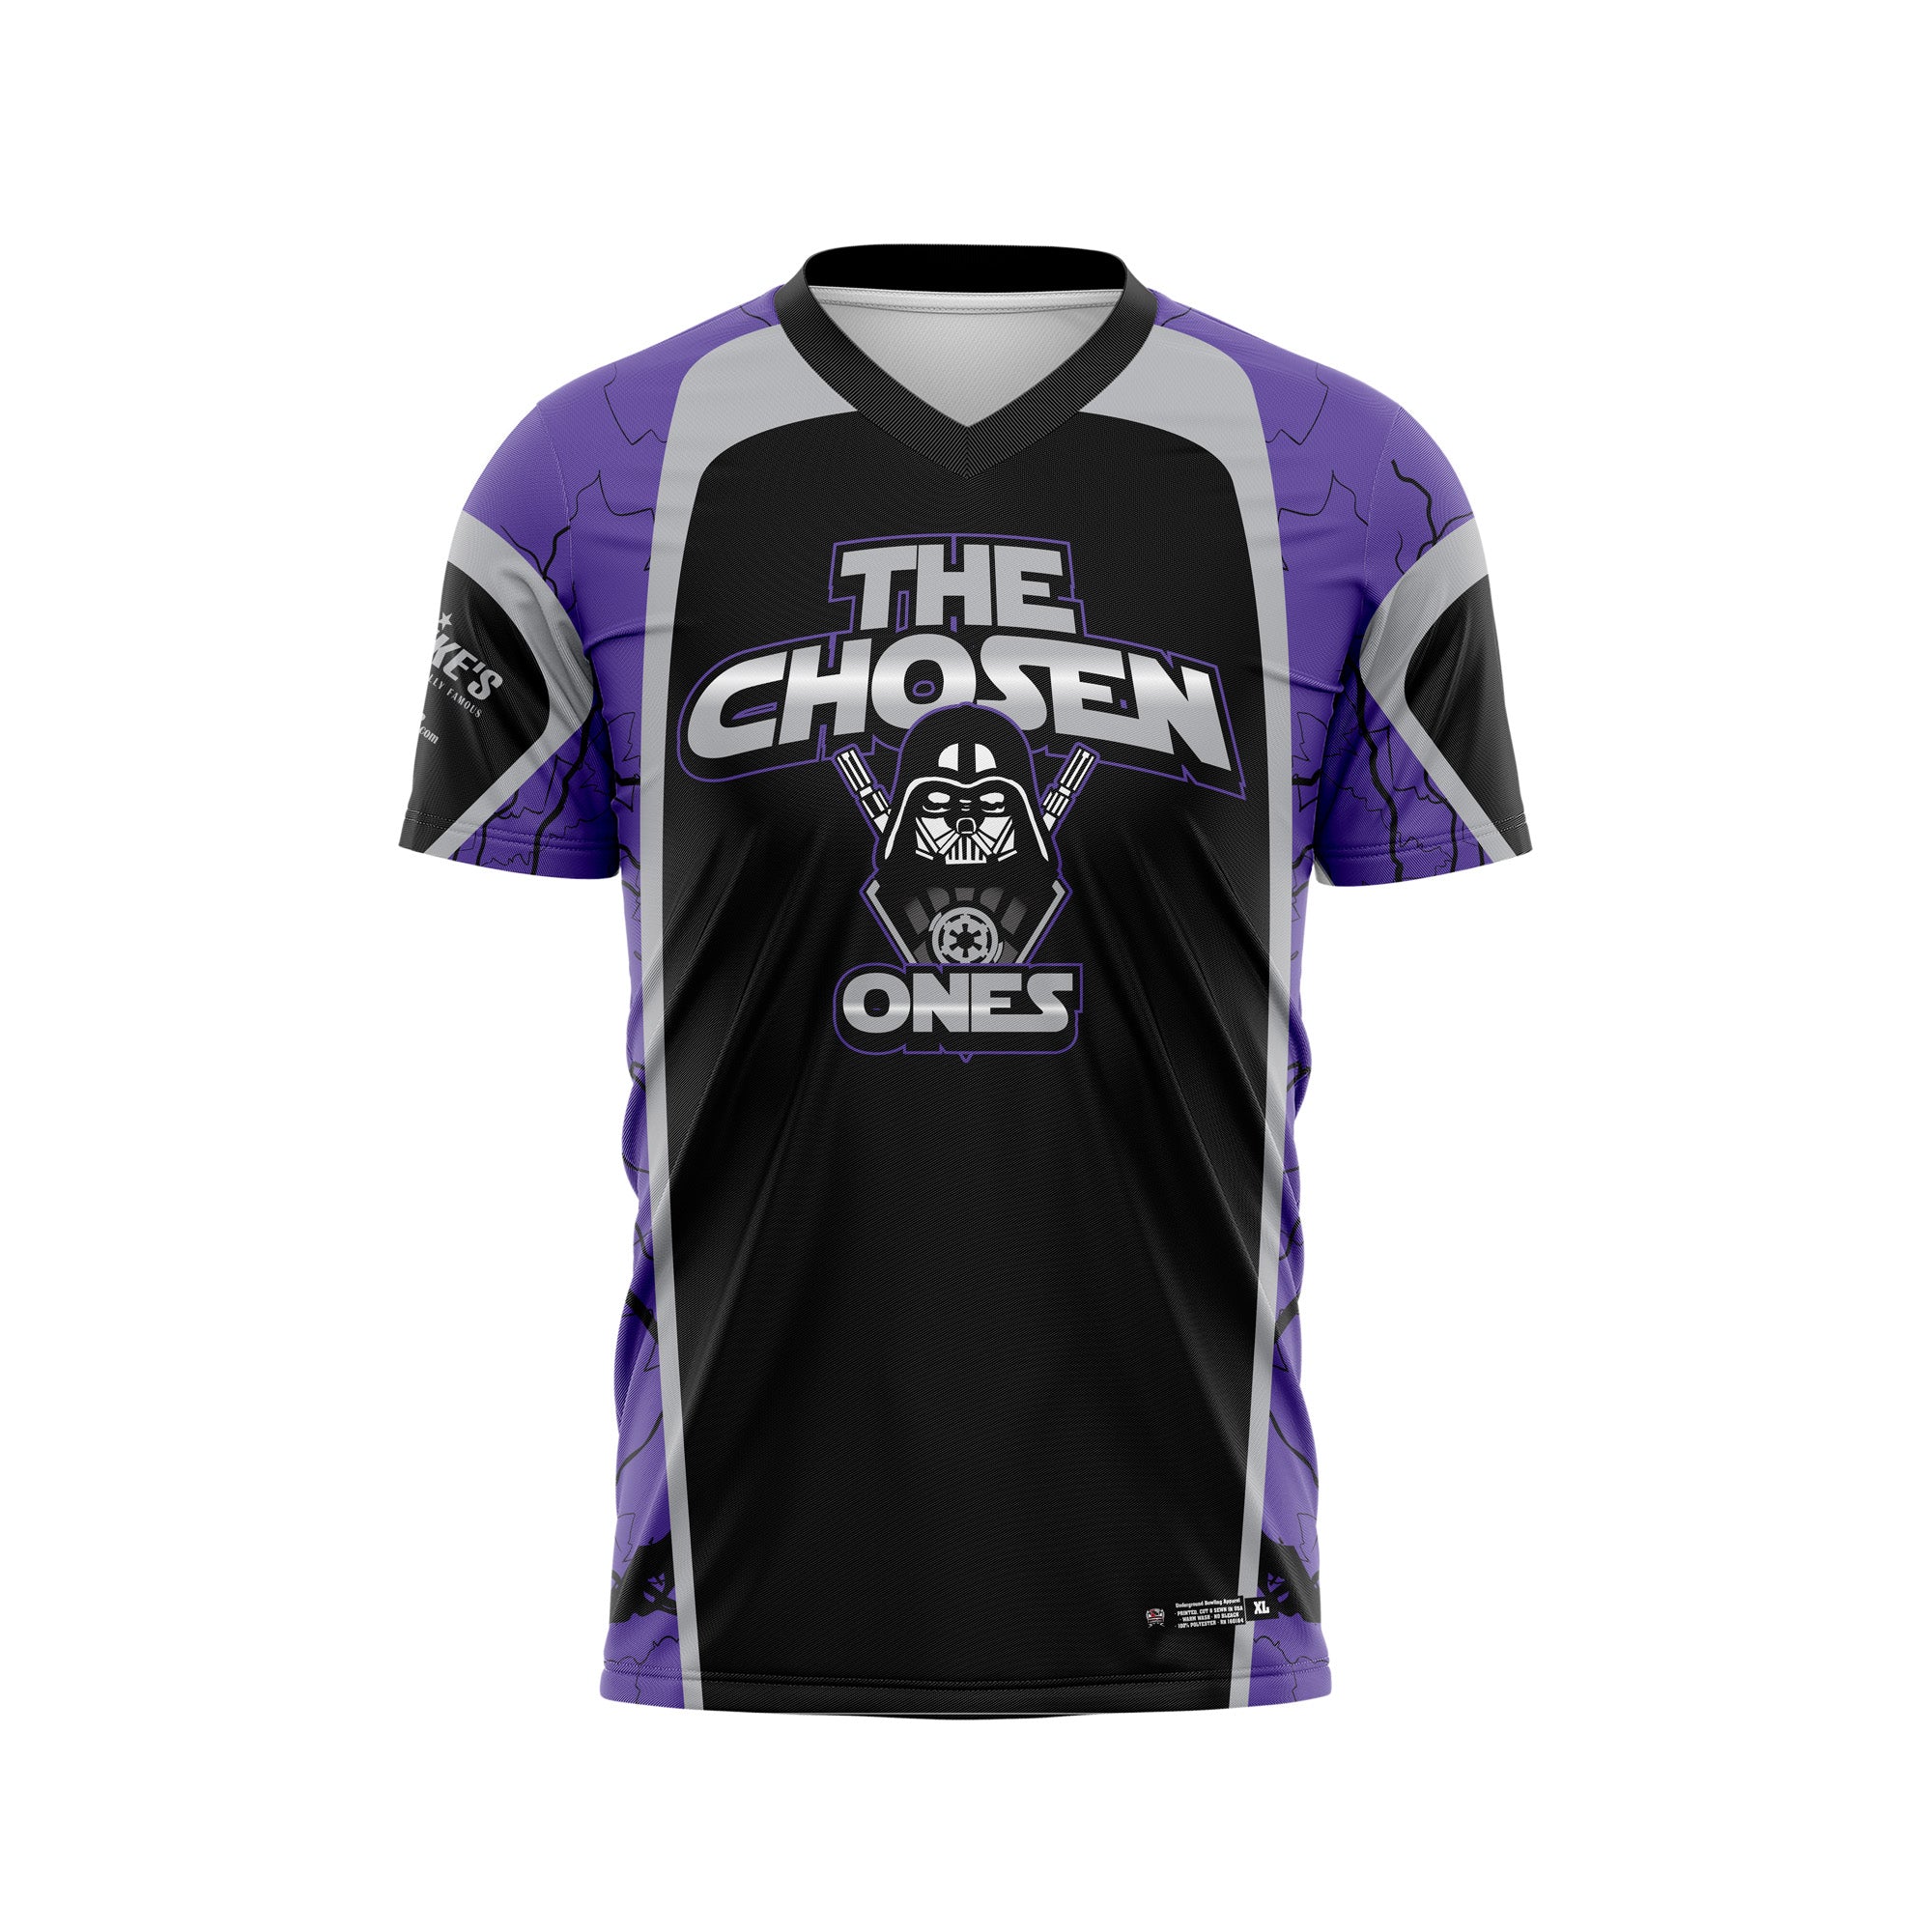 The Chosen Ones Home / Main Jersey